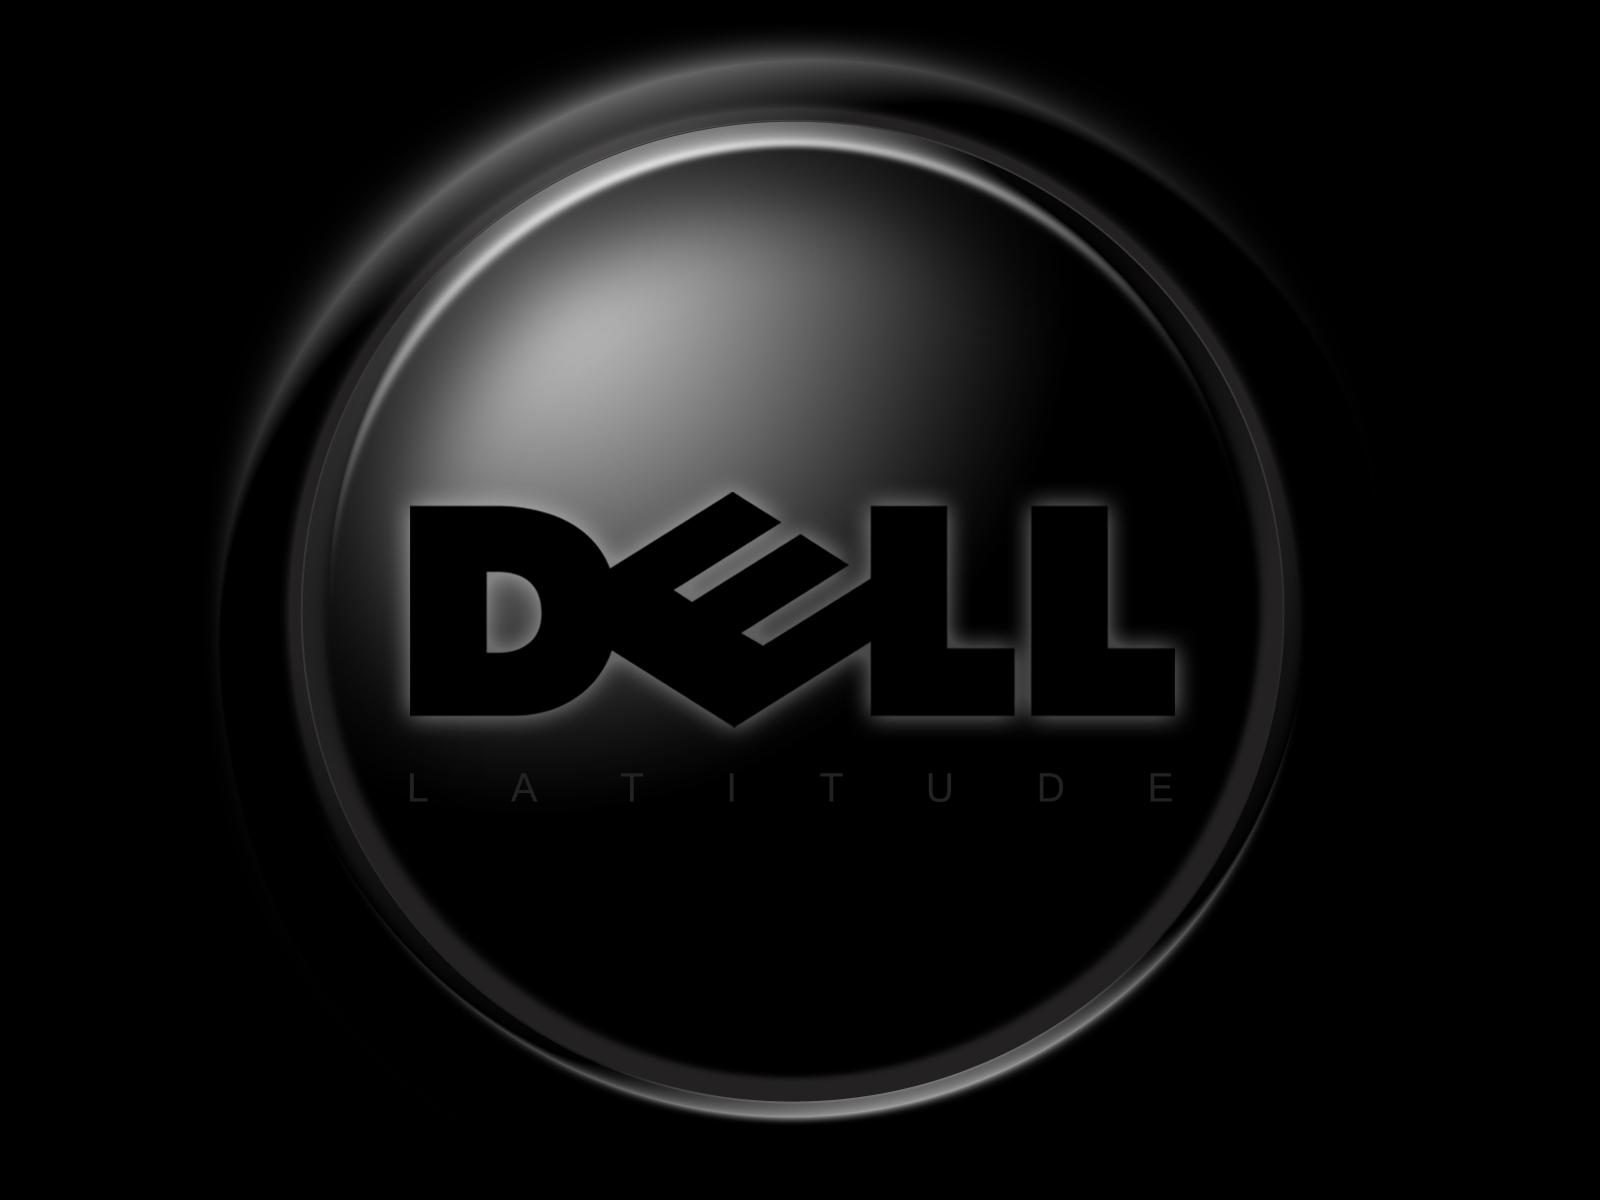 Hd Dell Backgrounds Dell Wallpaper Images For Windows